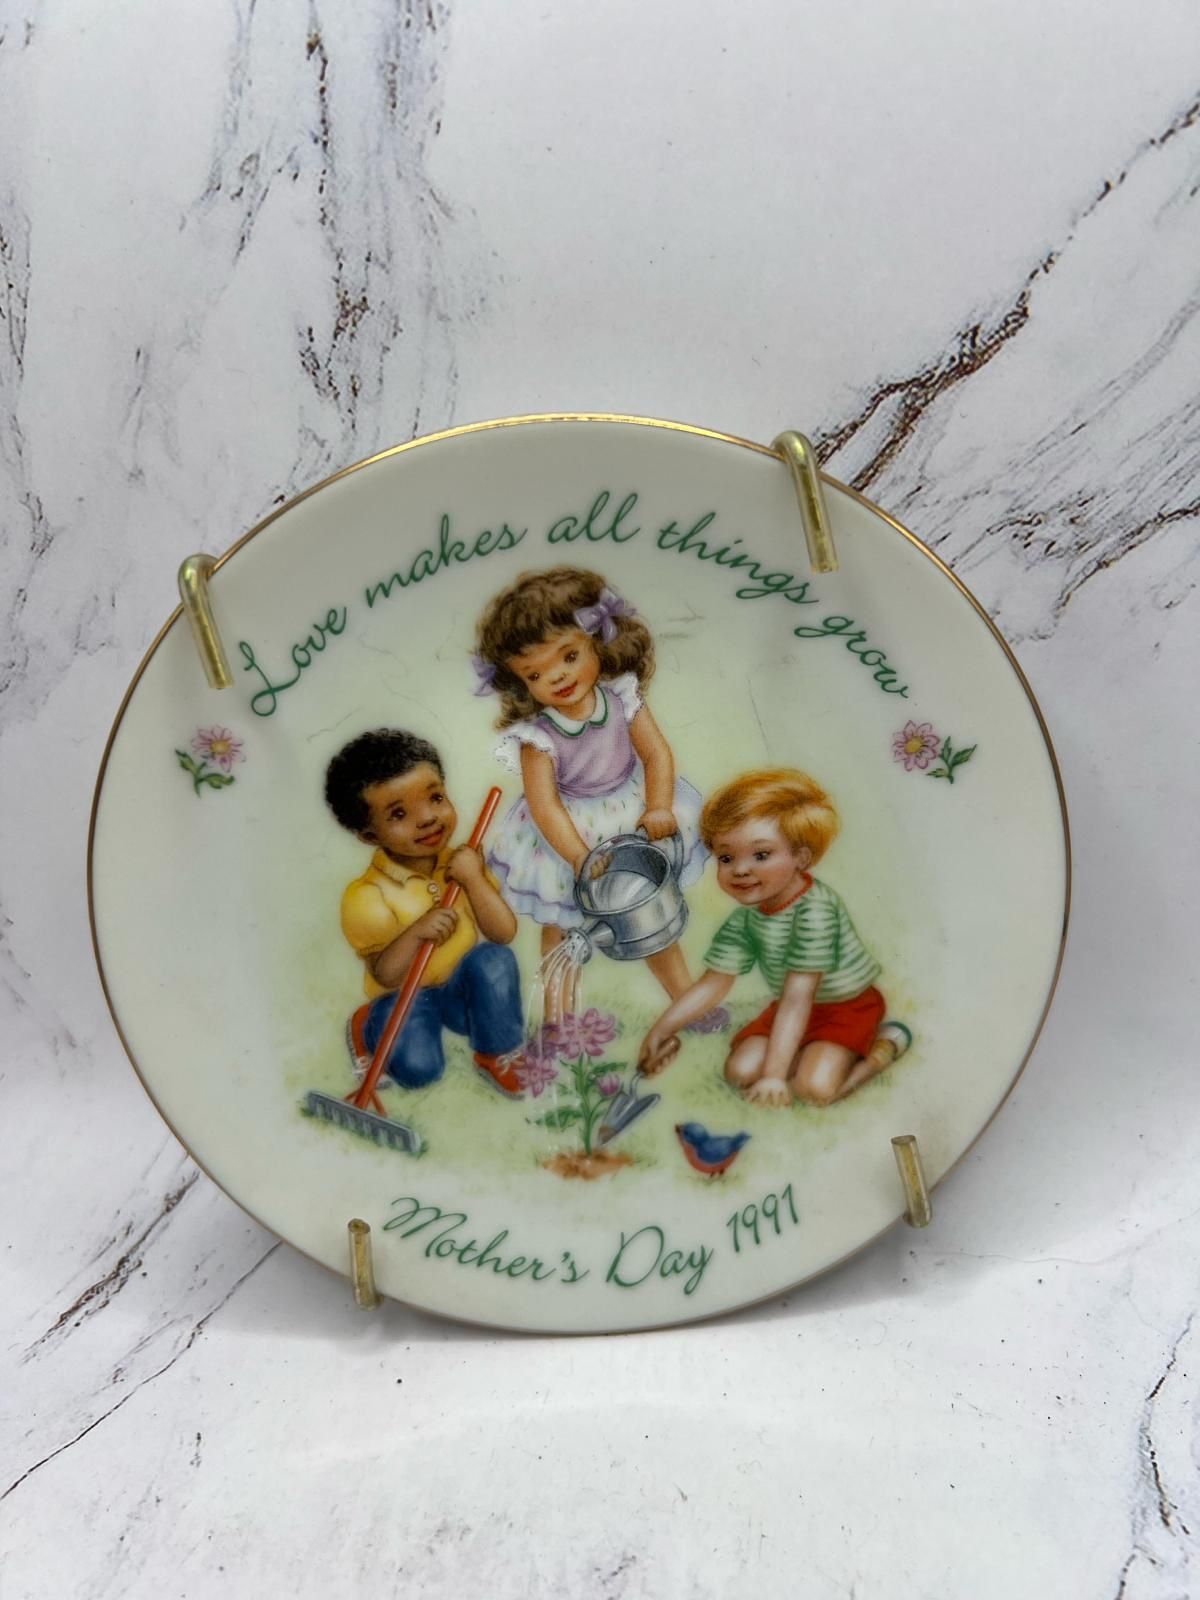 Vintage Avon Mother's Day Porcelain Plate Love Makes All Things Grow 1991 NWOB